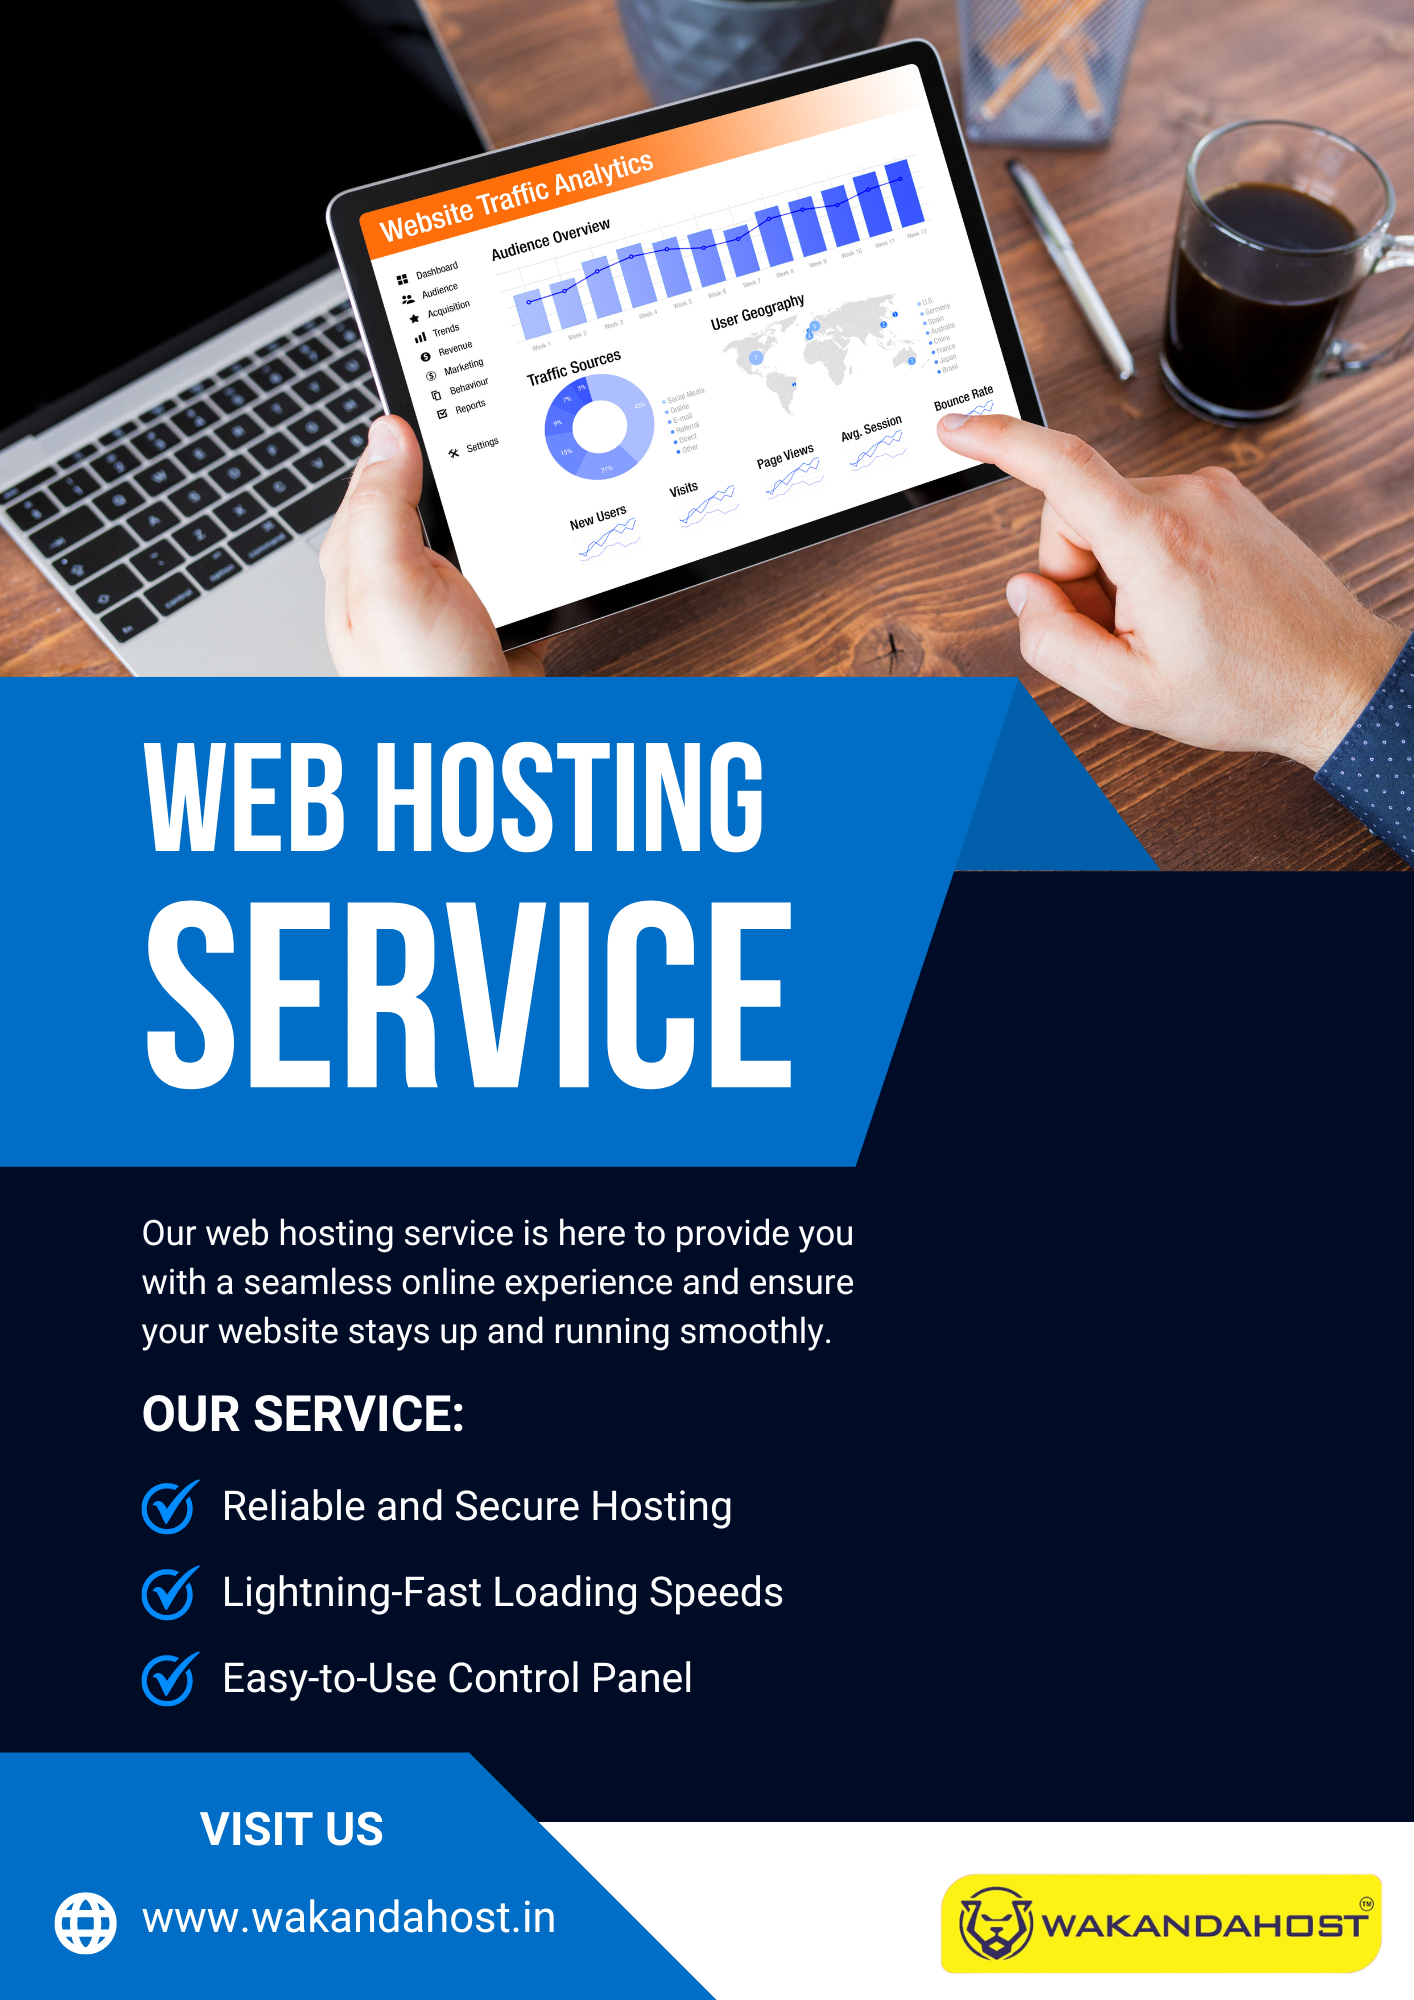 a

NaH:

Our web hosting service is here to provide you
with a seamless online experience and ensure
your website stays up and running smoothly.

OUR SERVICE:
Reliable and Secure Hosting
Lightning-Fast Loading Speeds

Easy-to-Use Control Panel

VISIT US

   

2] www.wakandahost.in {J wakanoarHosT